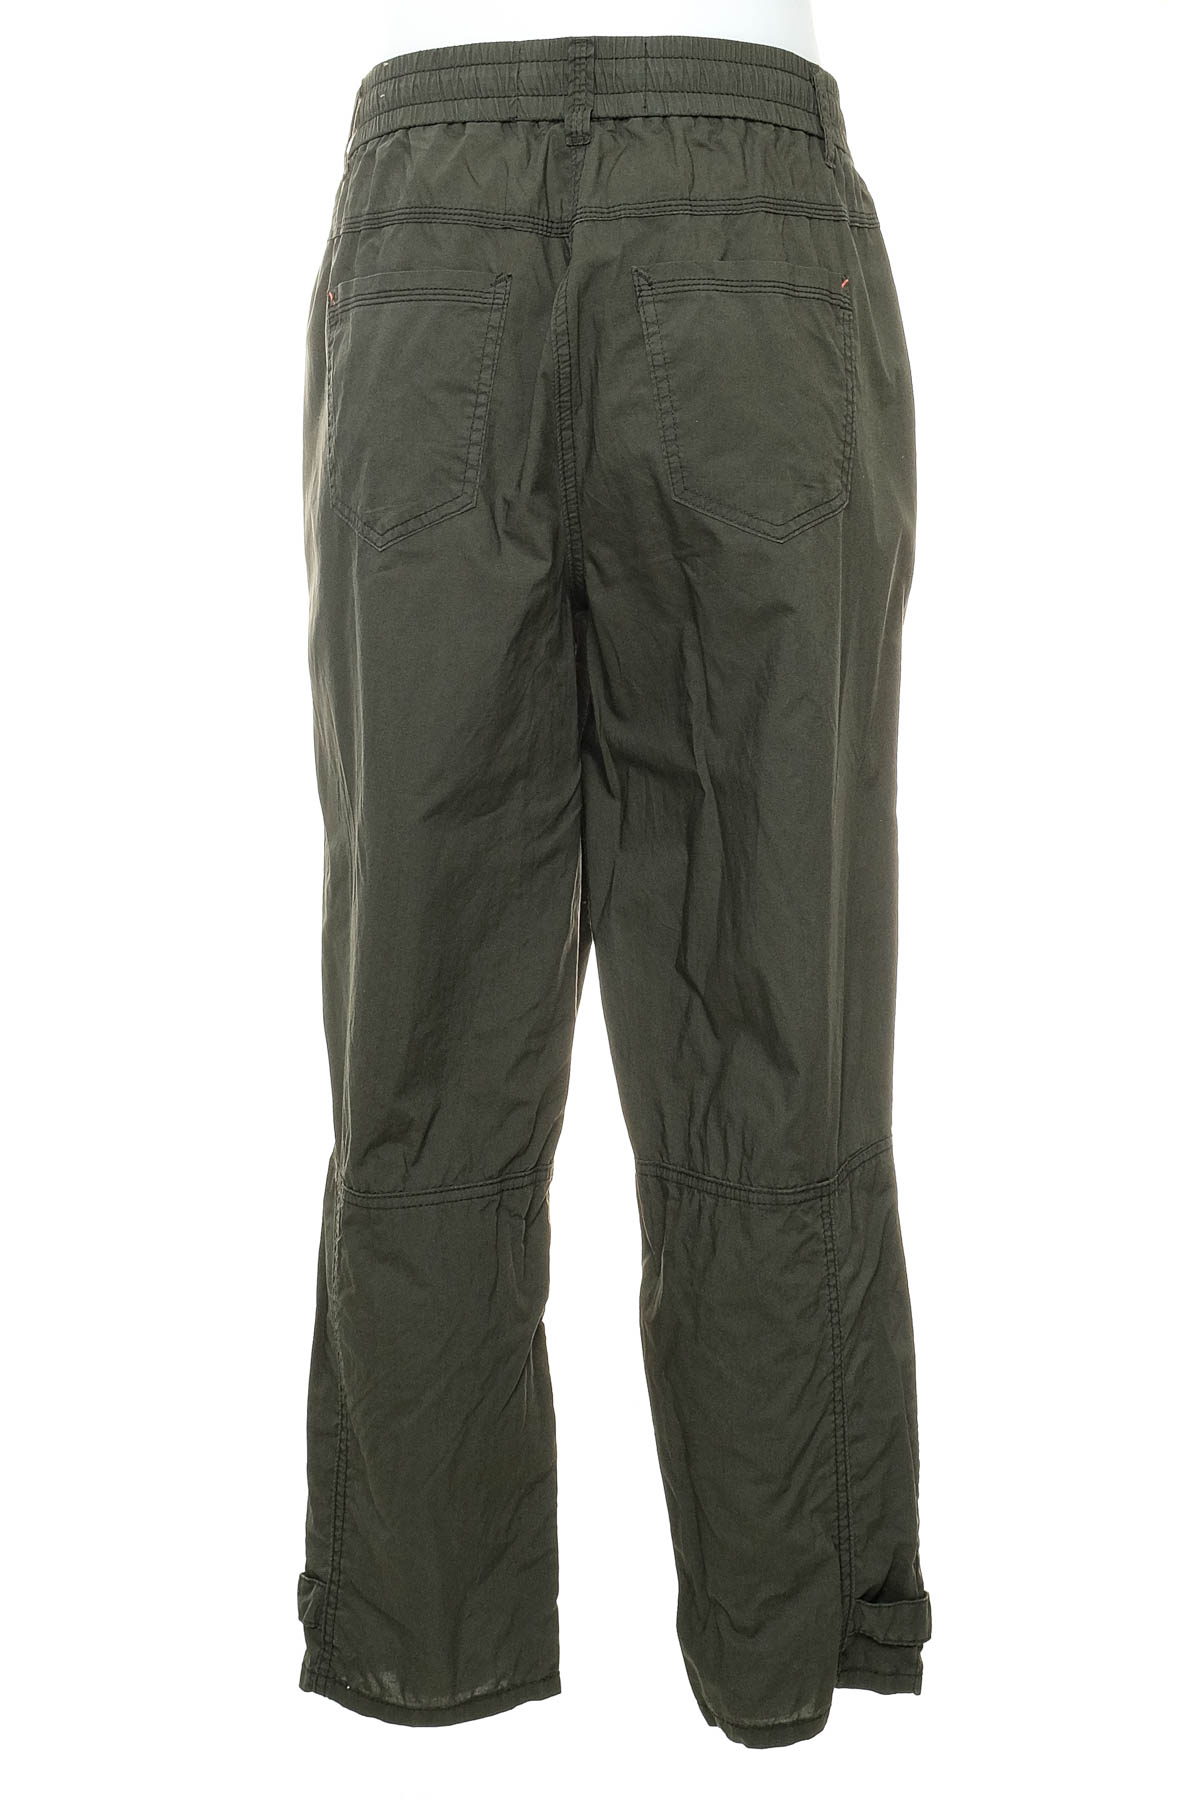 Women's trousers - CECIL - 1